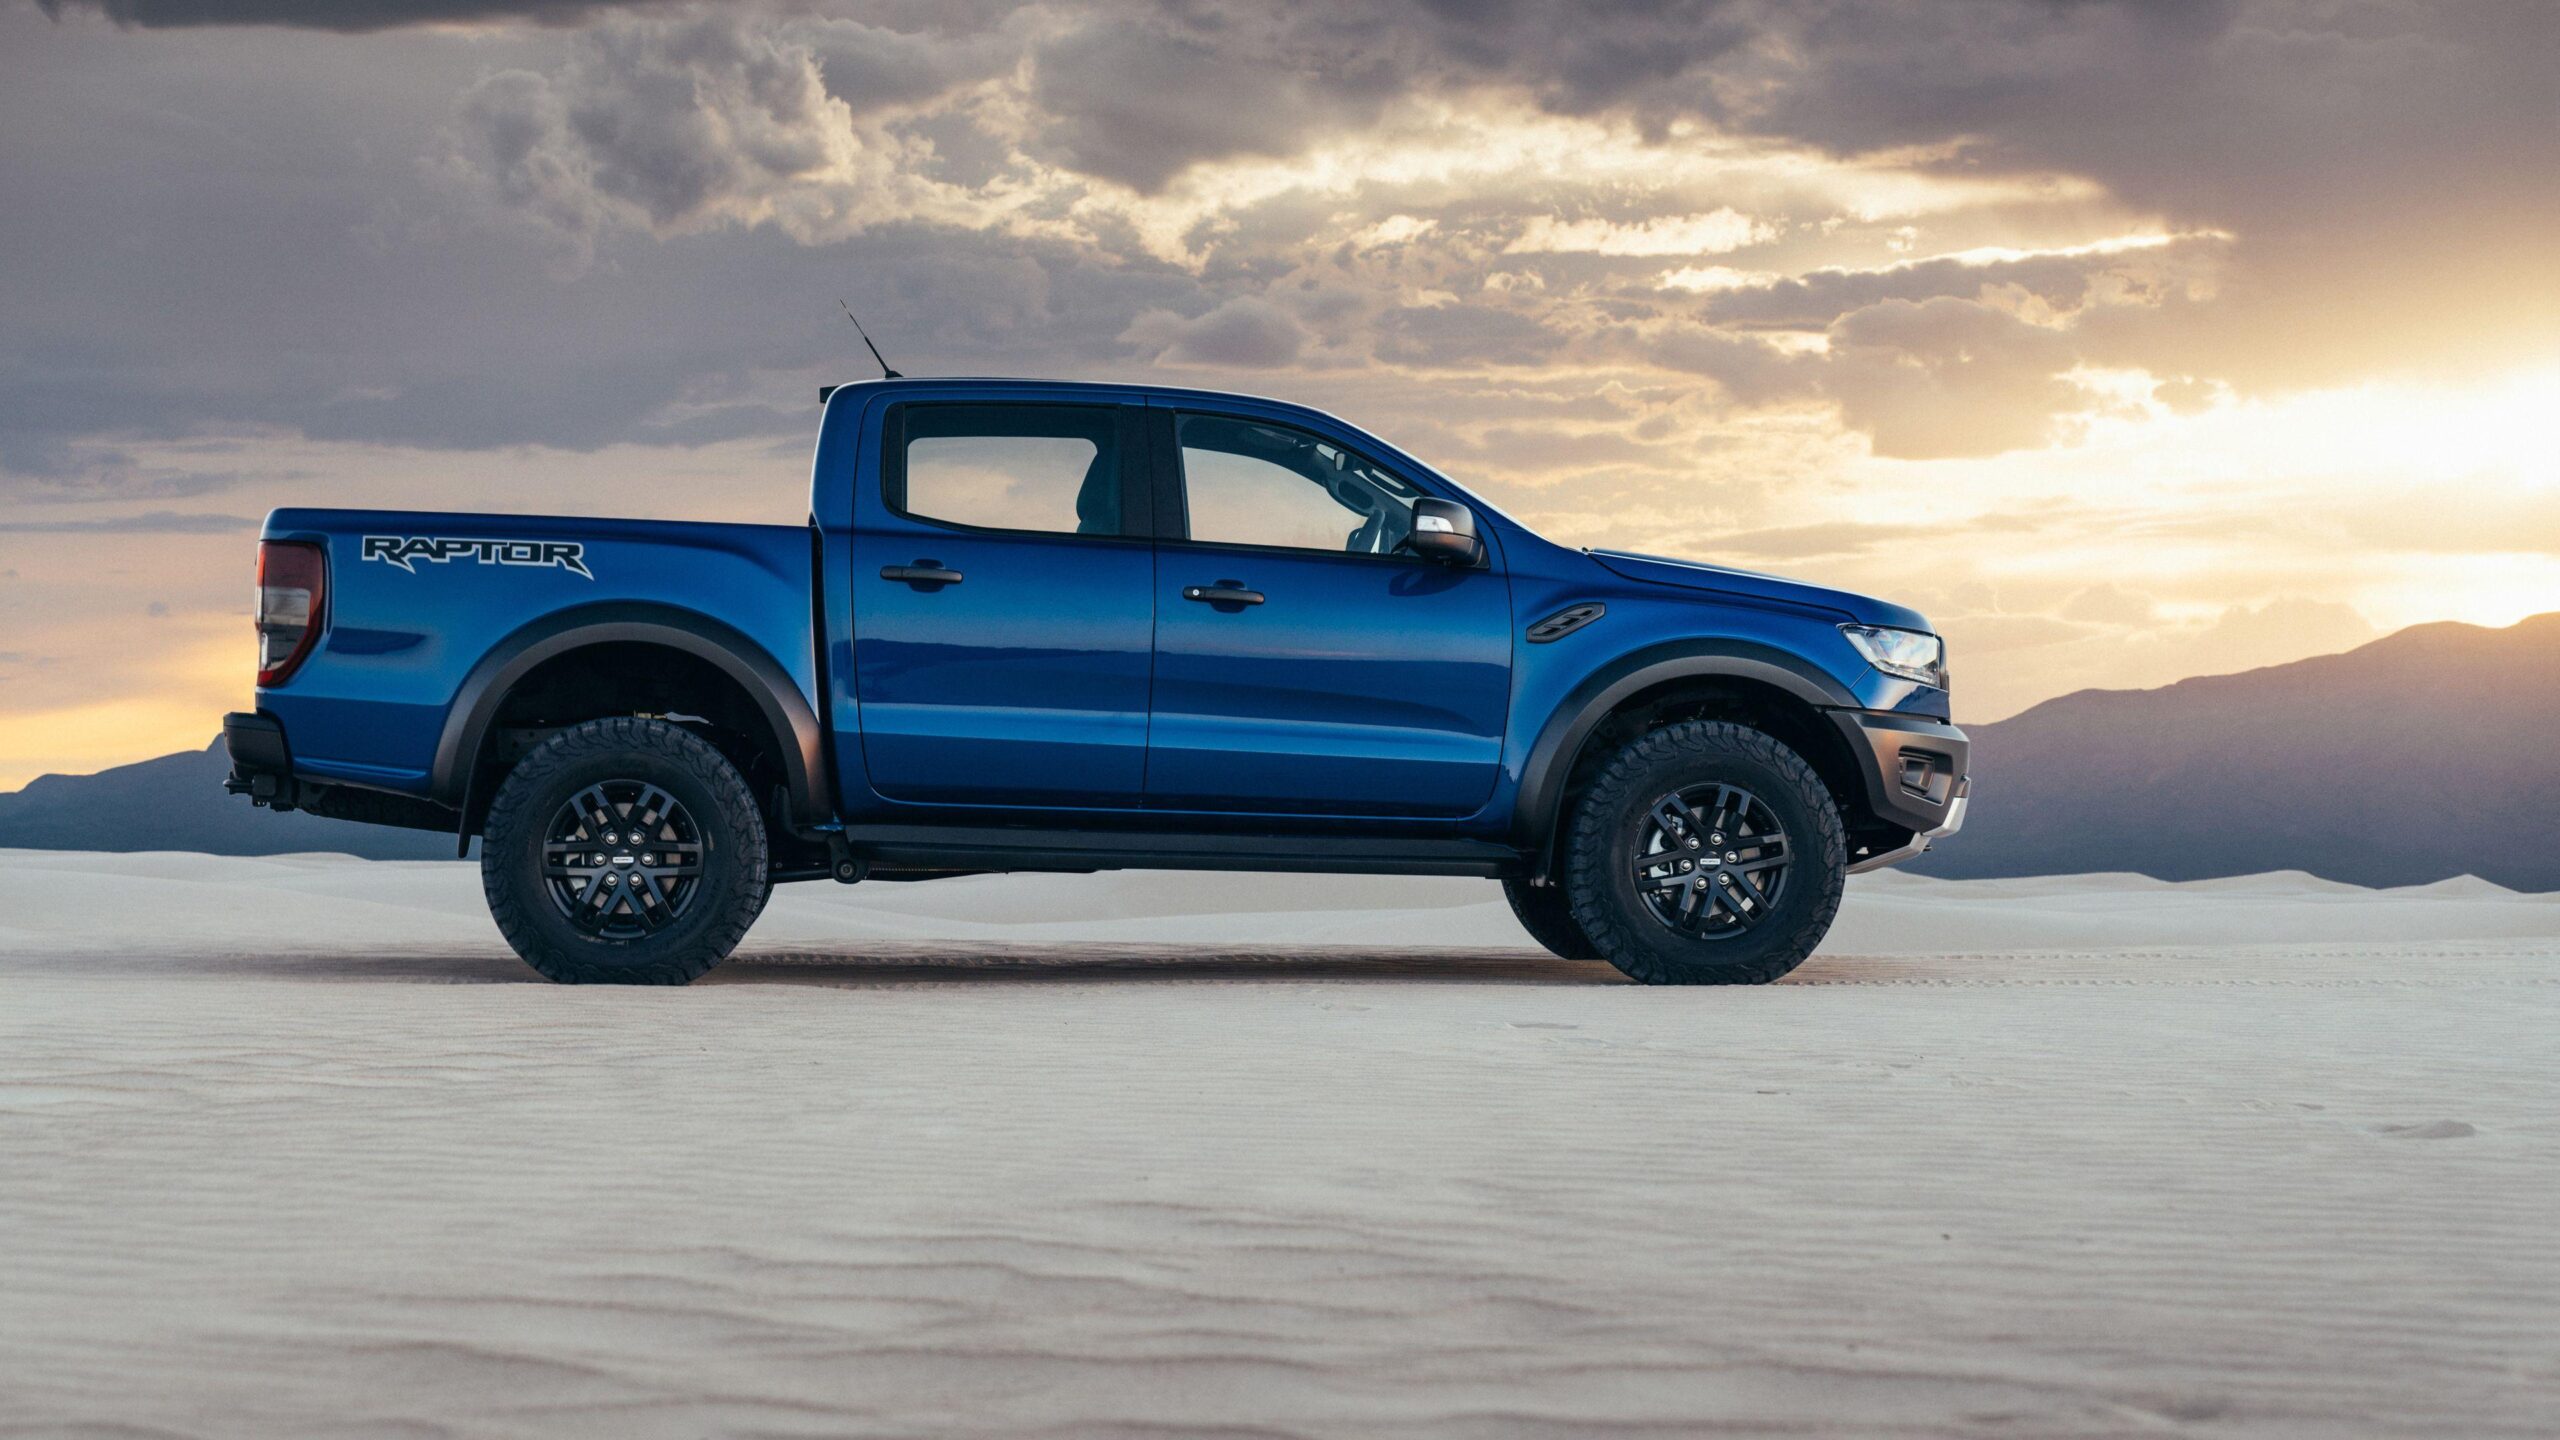 Ford Ranger Raptor Side View truck wallpapers, hd